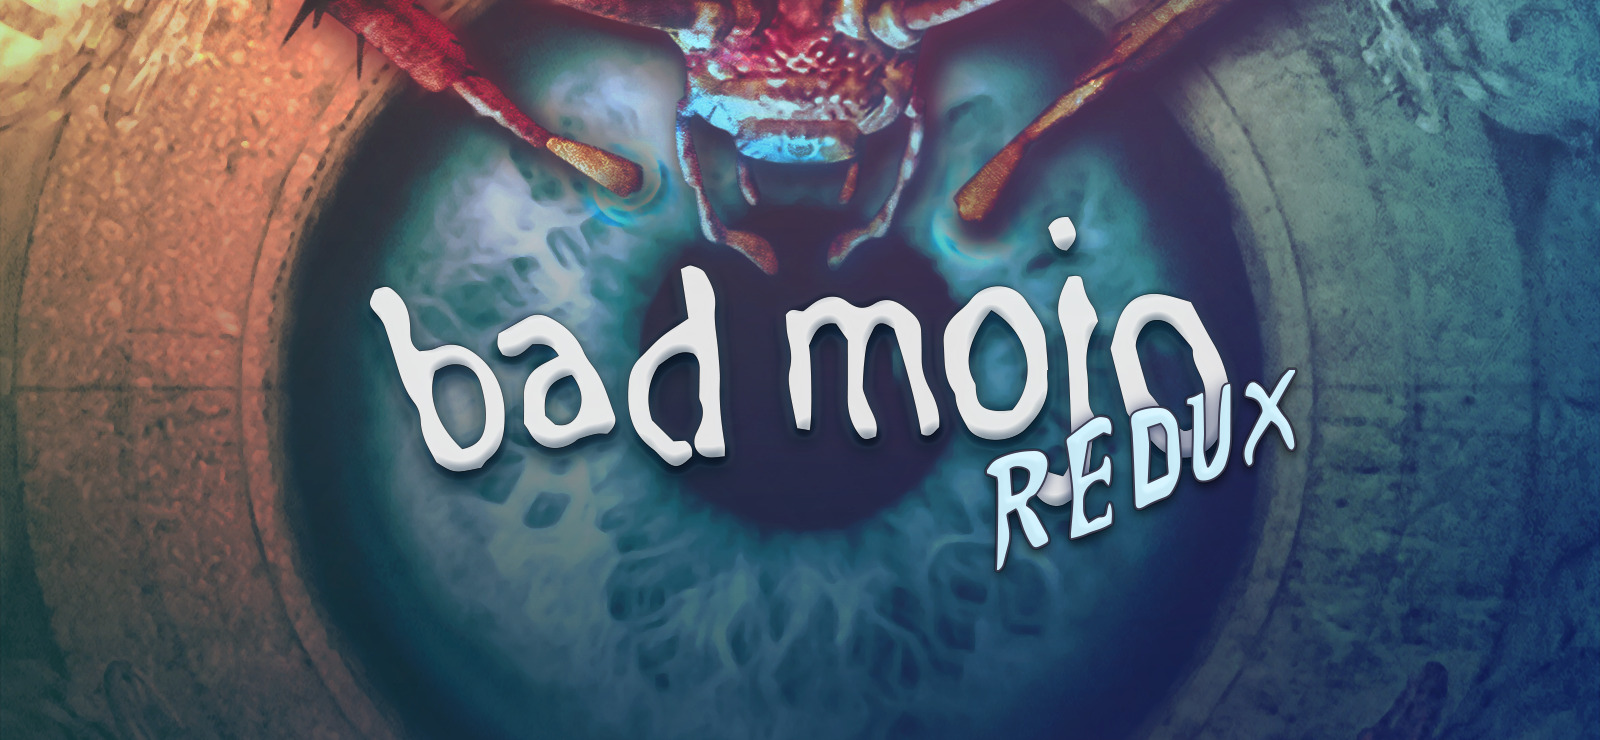 download bad mojo gog for free